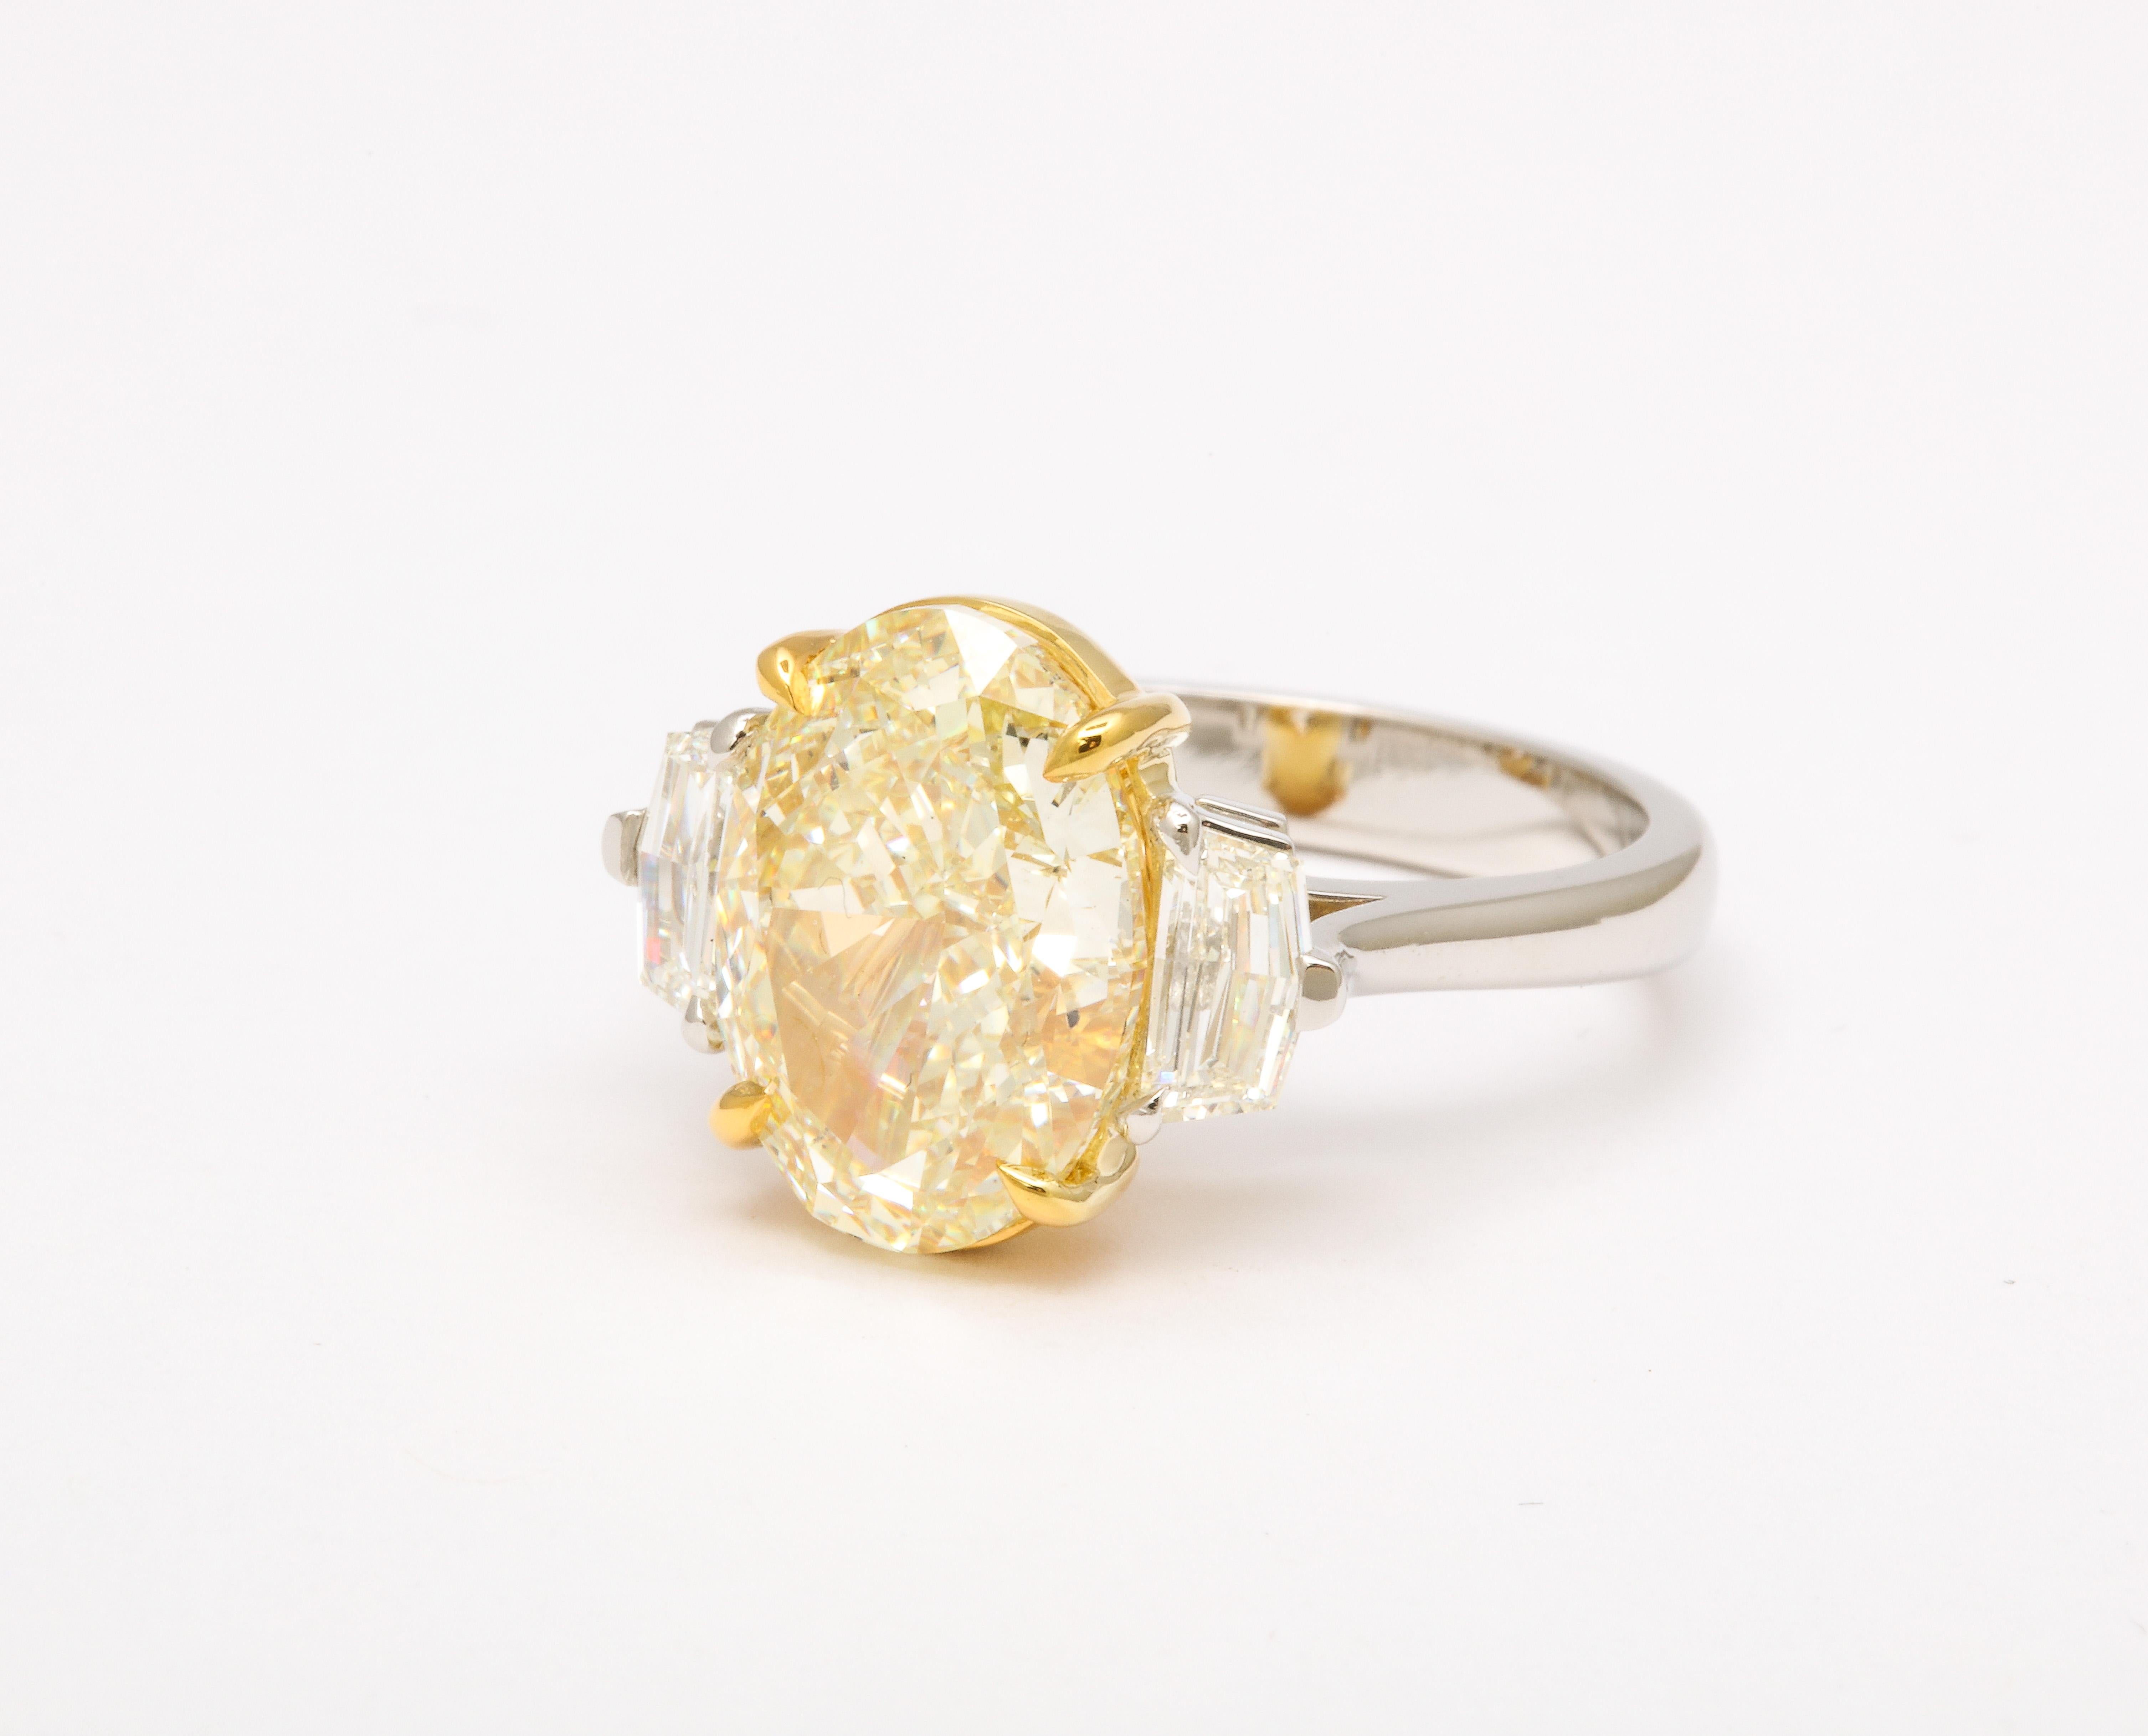 6 Carat Oval Yellow Diamond Ring Gia Certified For Sale 2